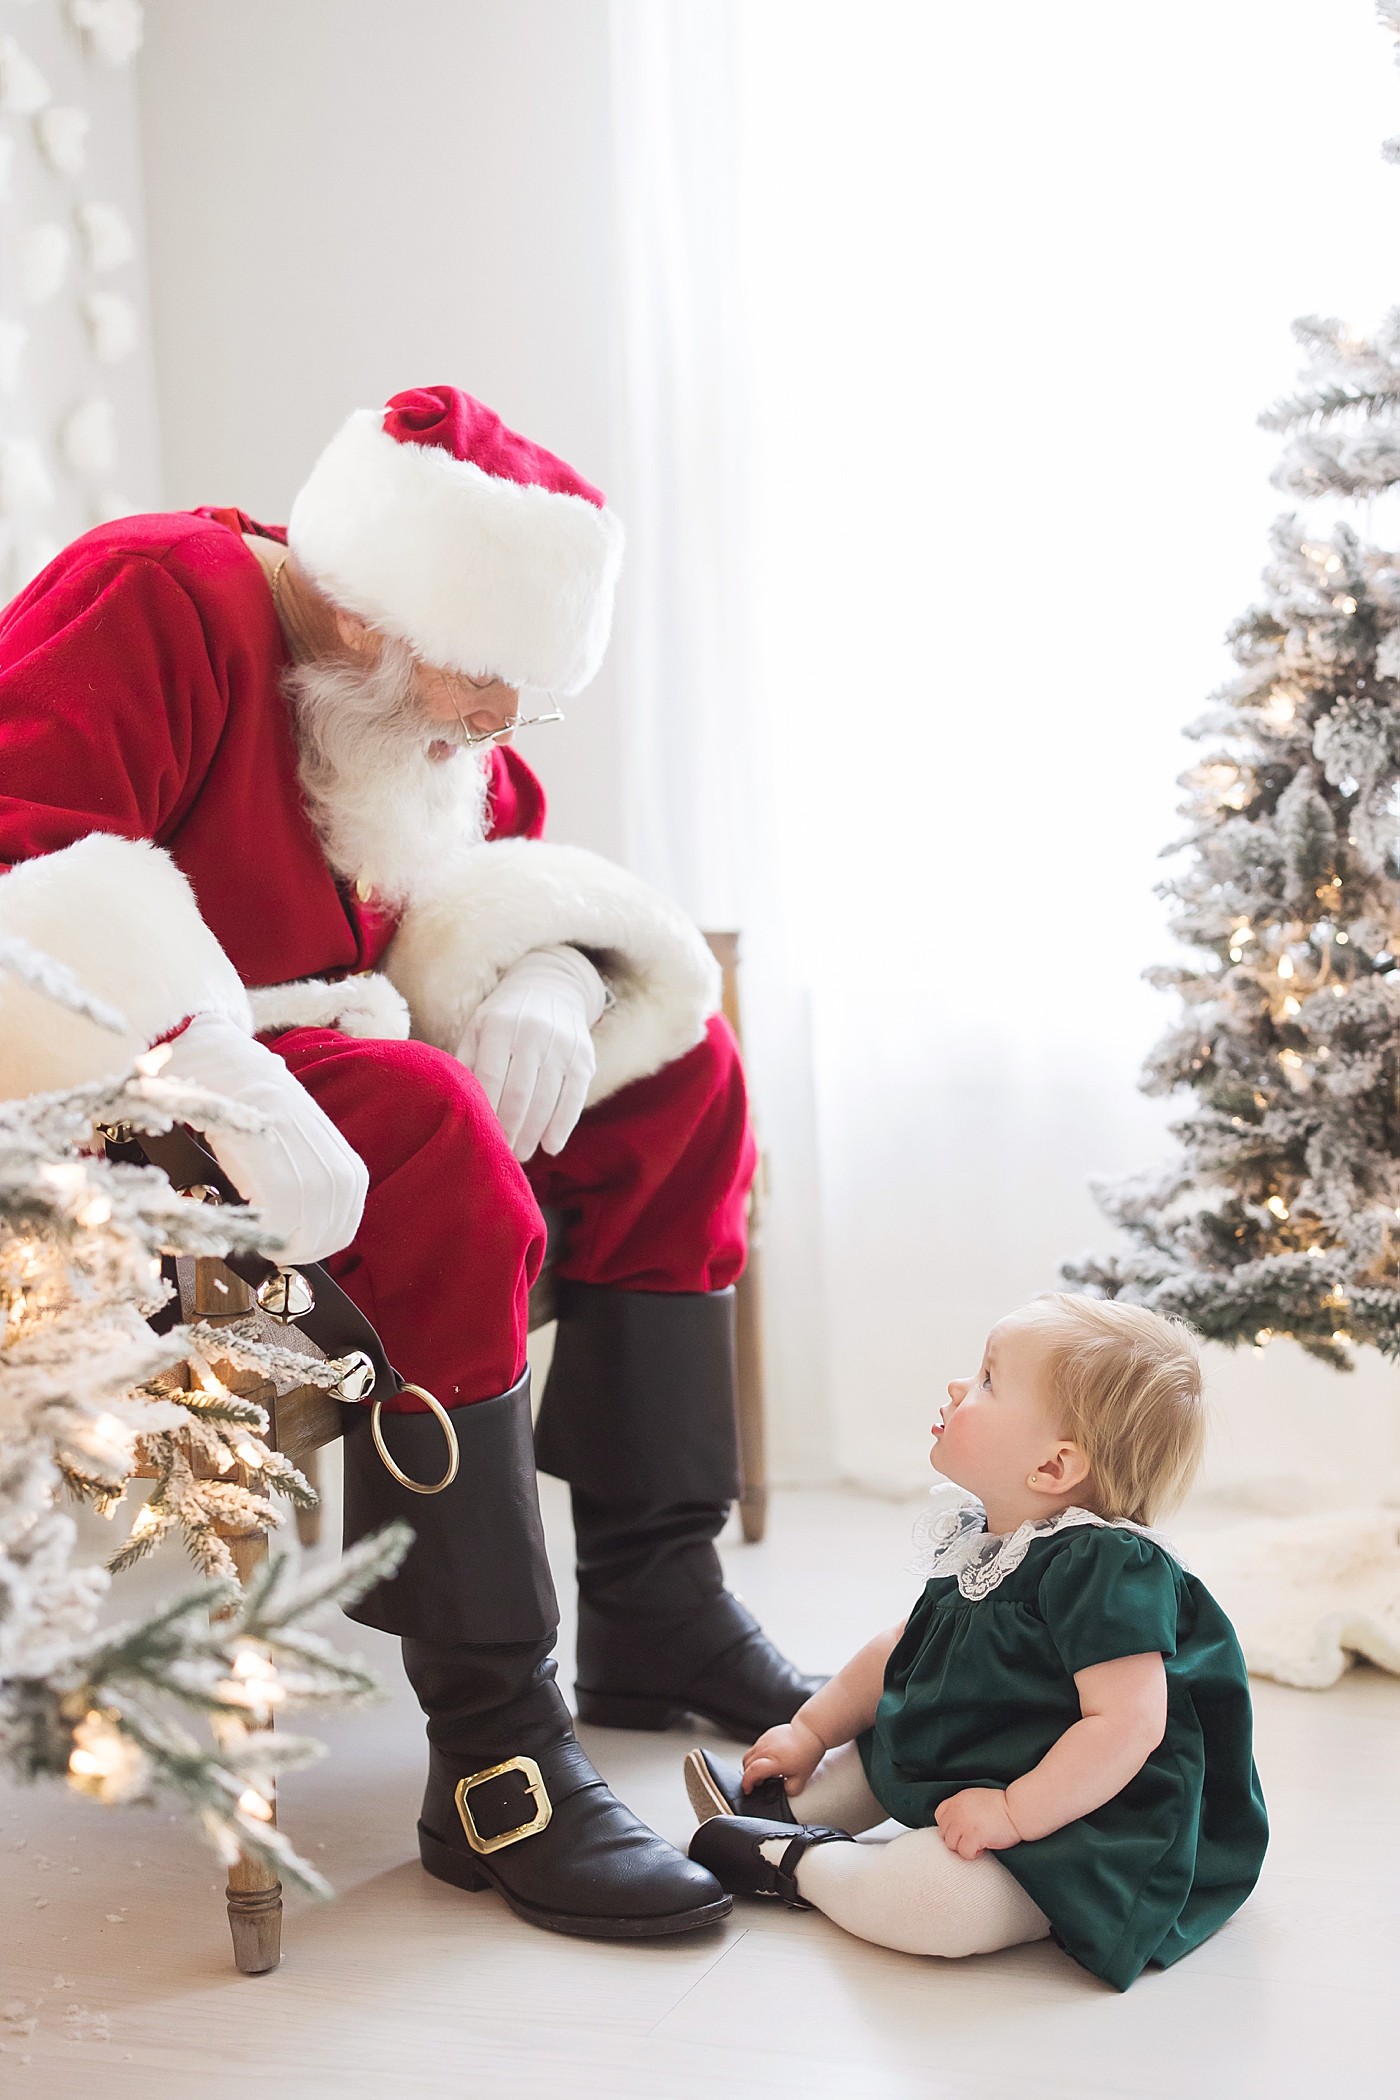 Baby girl sitting on floor looking up at Santa. Photo by Fresh Light Photography.